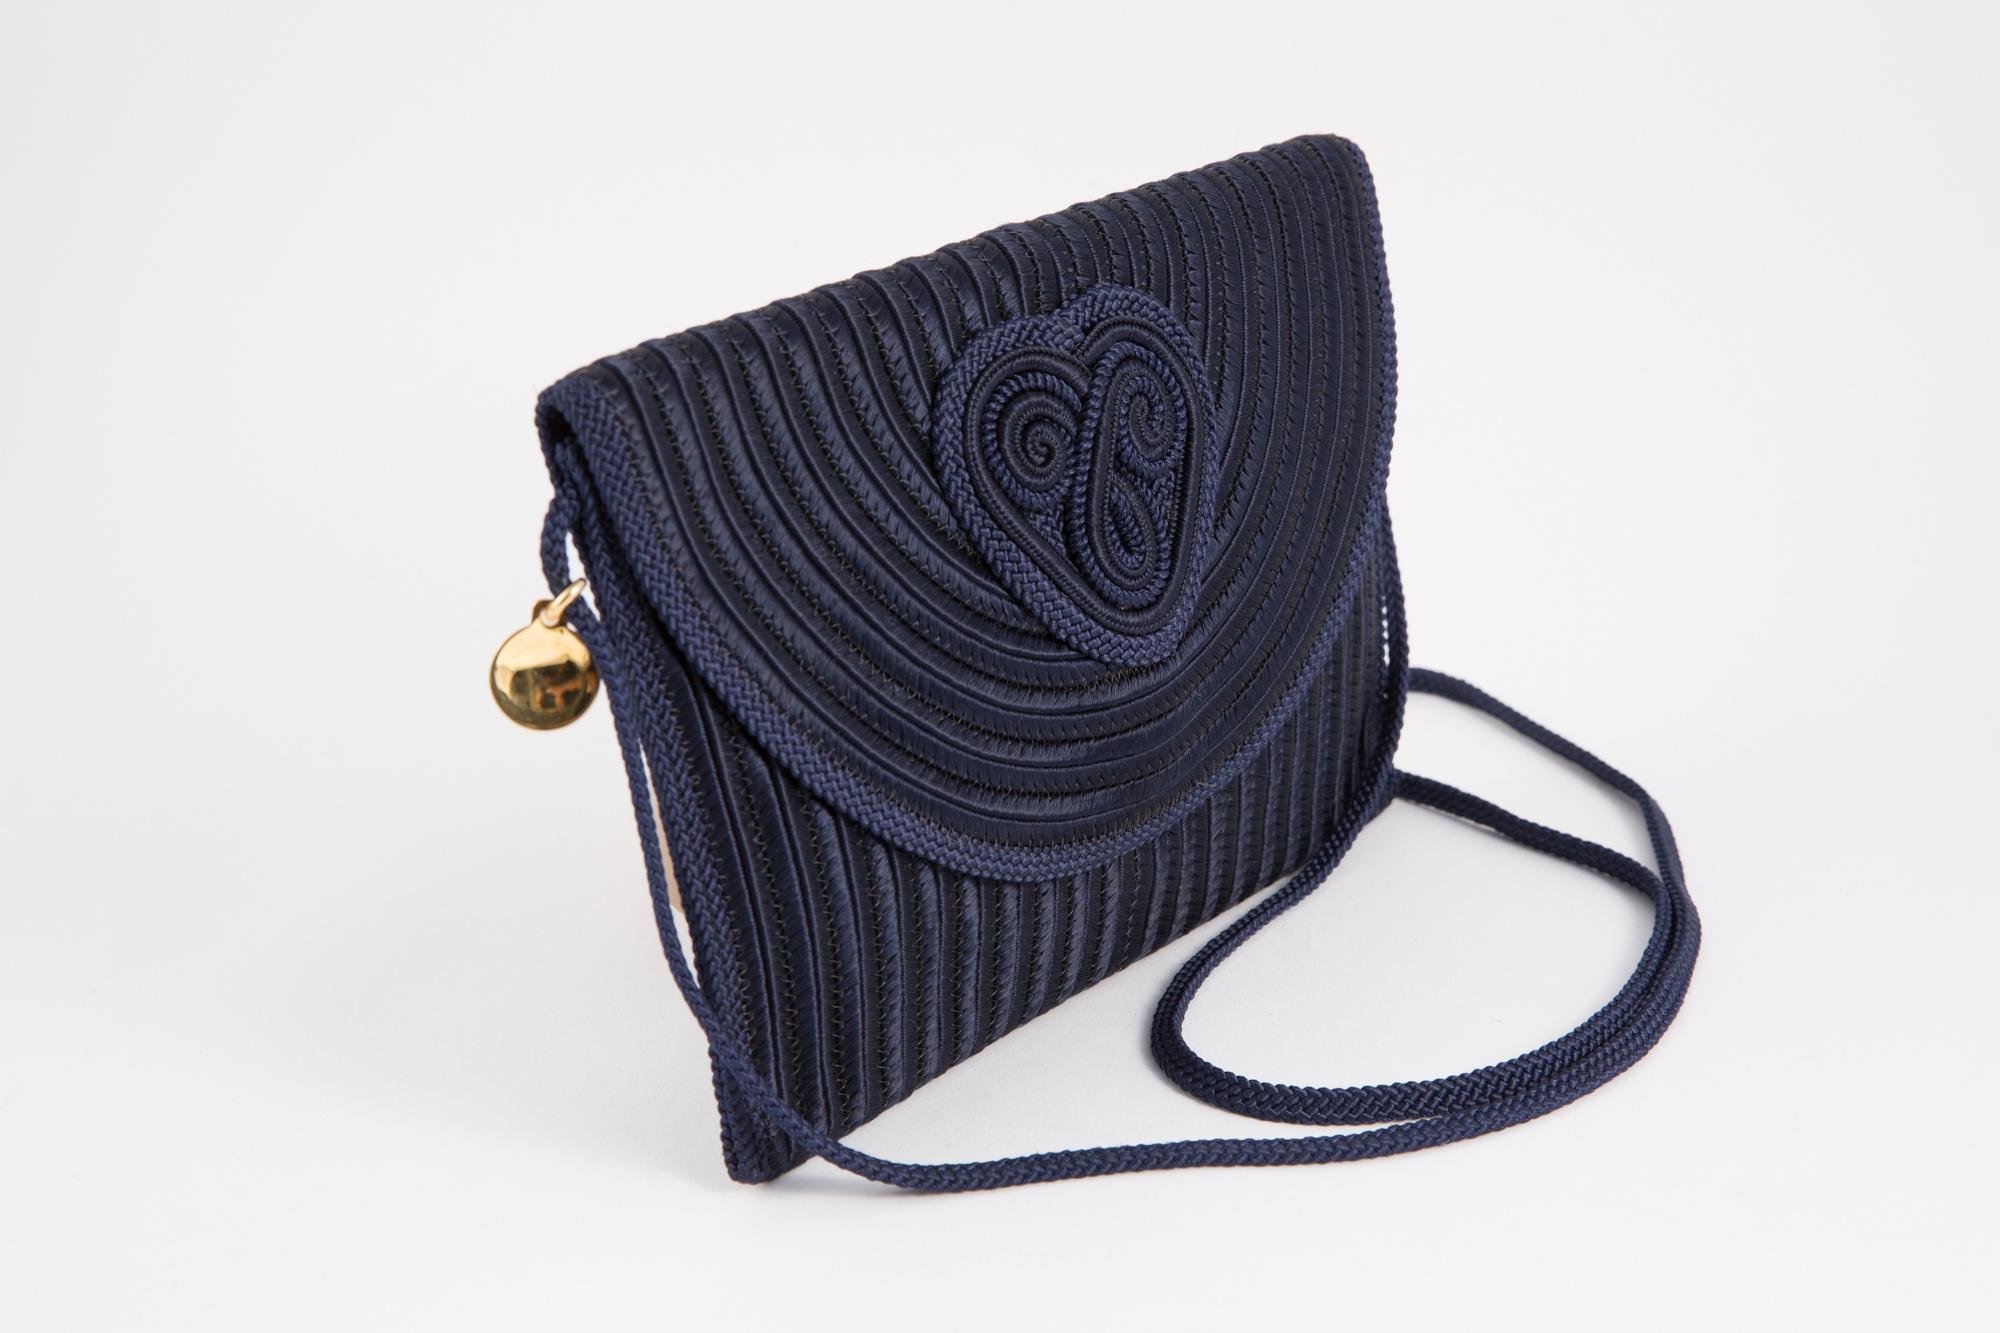 Nina Ricci 1980s silk navy braided bag featuring a front flap with a braided heart, a front under flap snap, a long braided shoulder handle (41.3in. (105cm)) with a gold tone logo medal on.
In excellent vintage condition. Made in